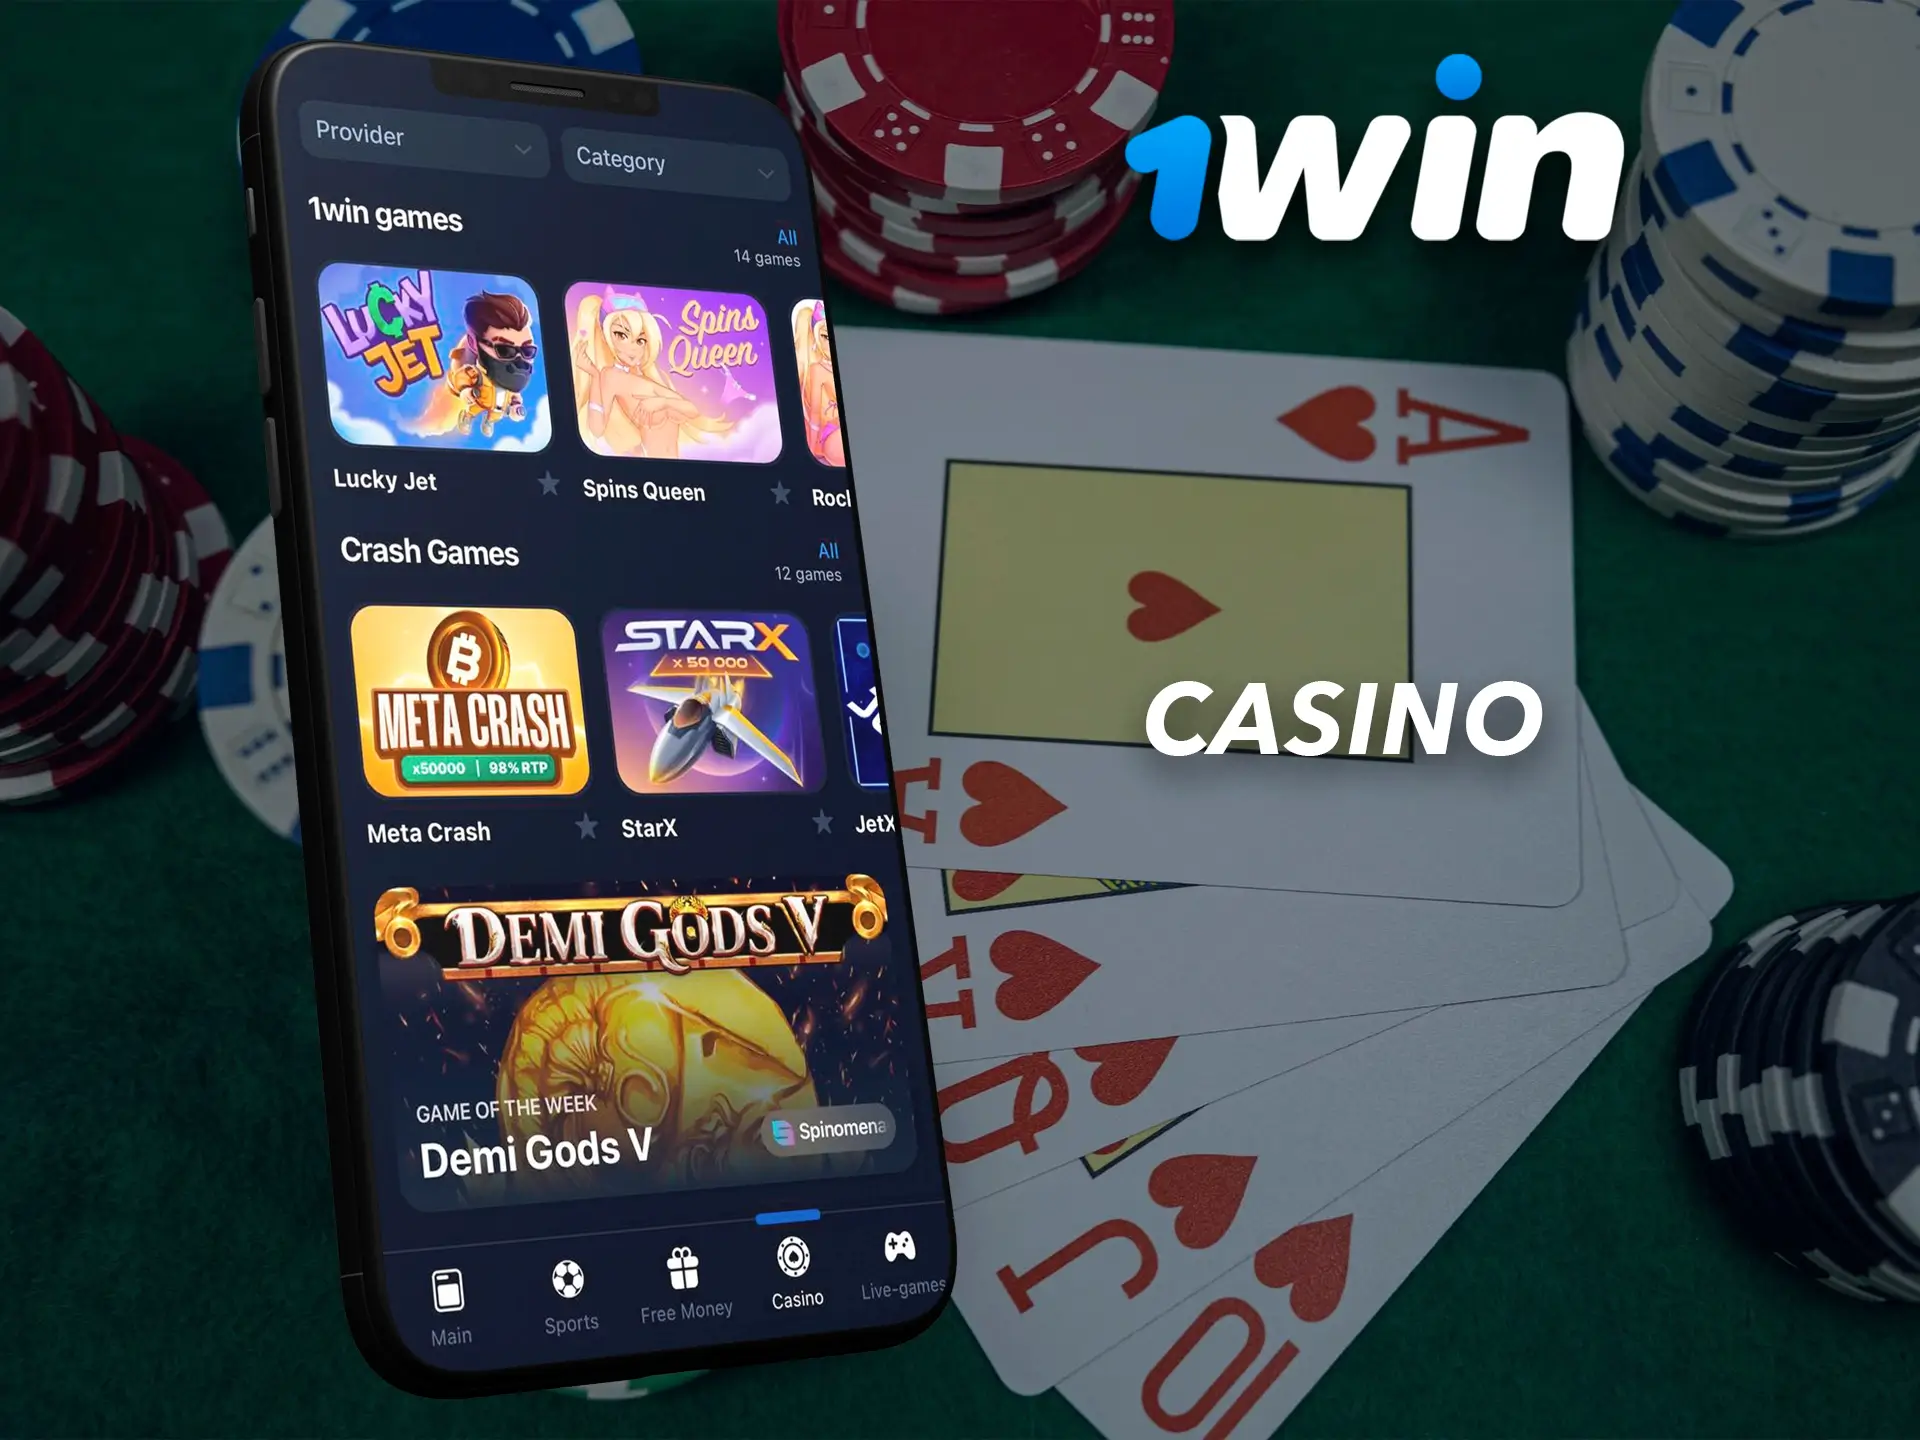 Experience the feeling of excitement with 1Win Casino.